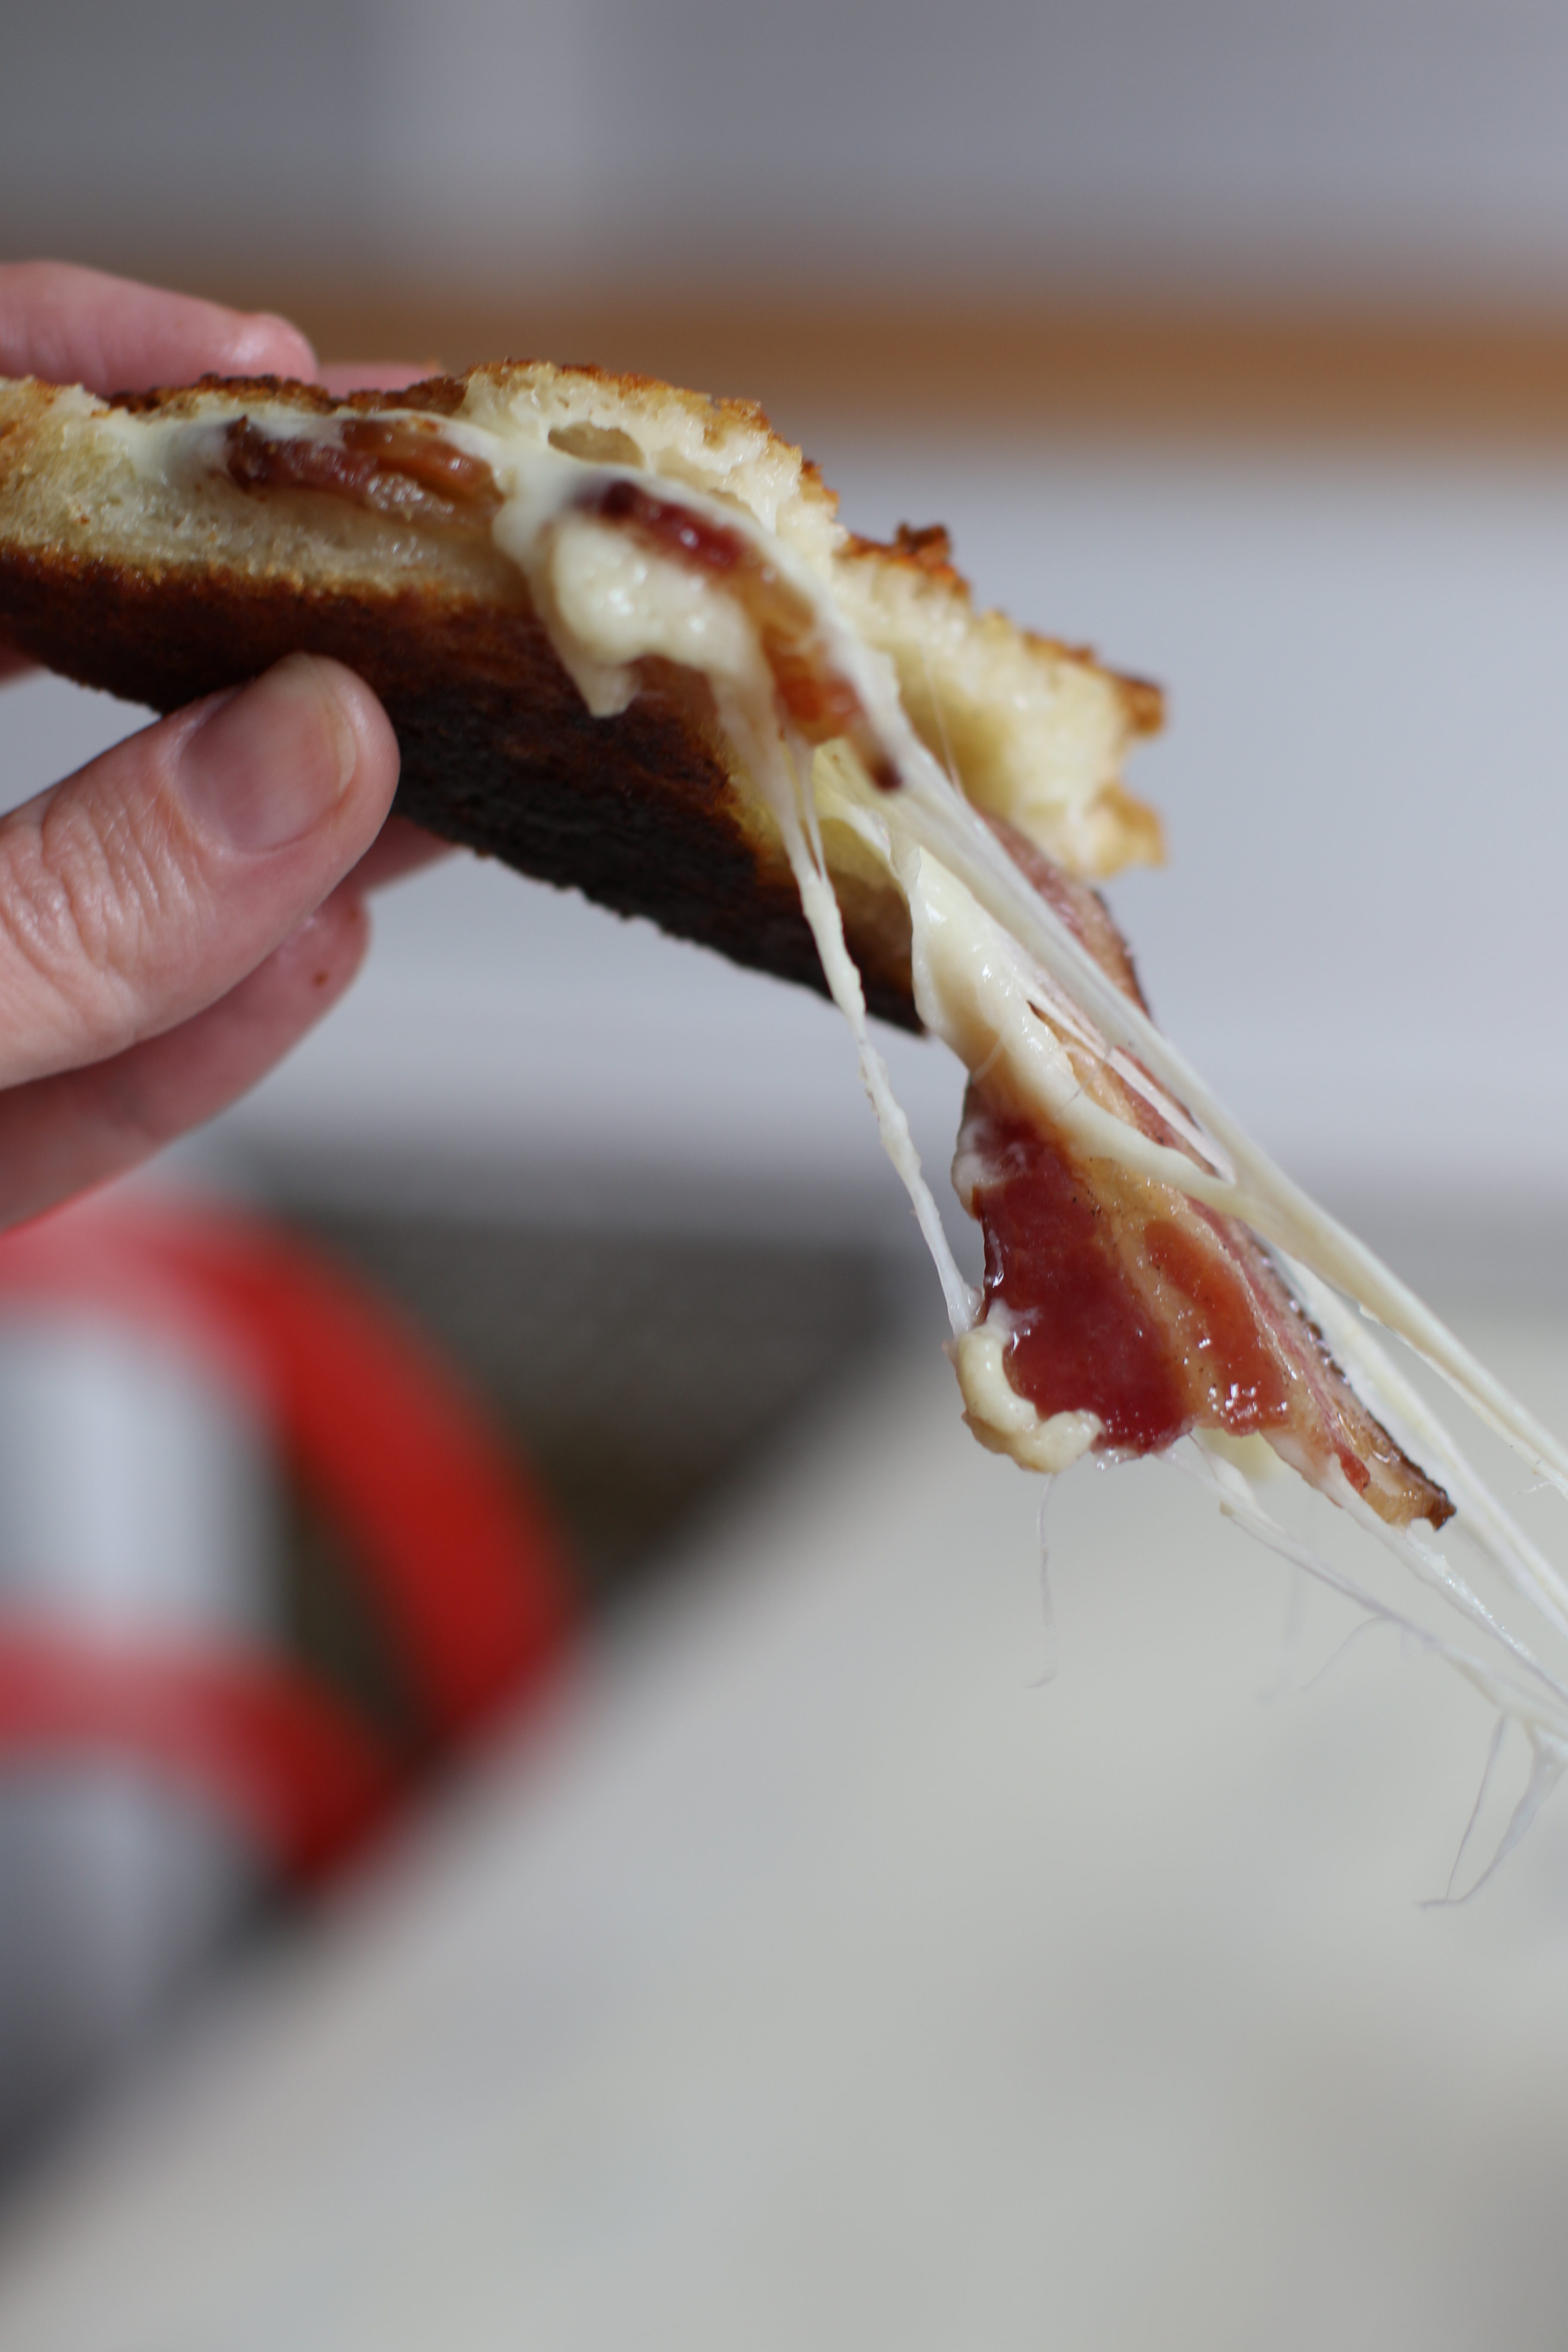 Don’t Grill Us: We’ll Give You Our Grilled Cheese Secrets!